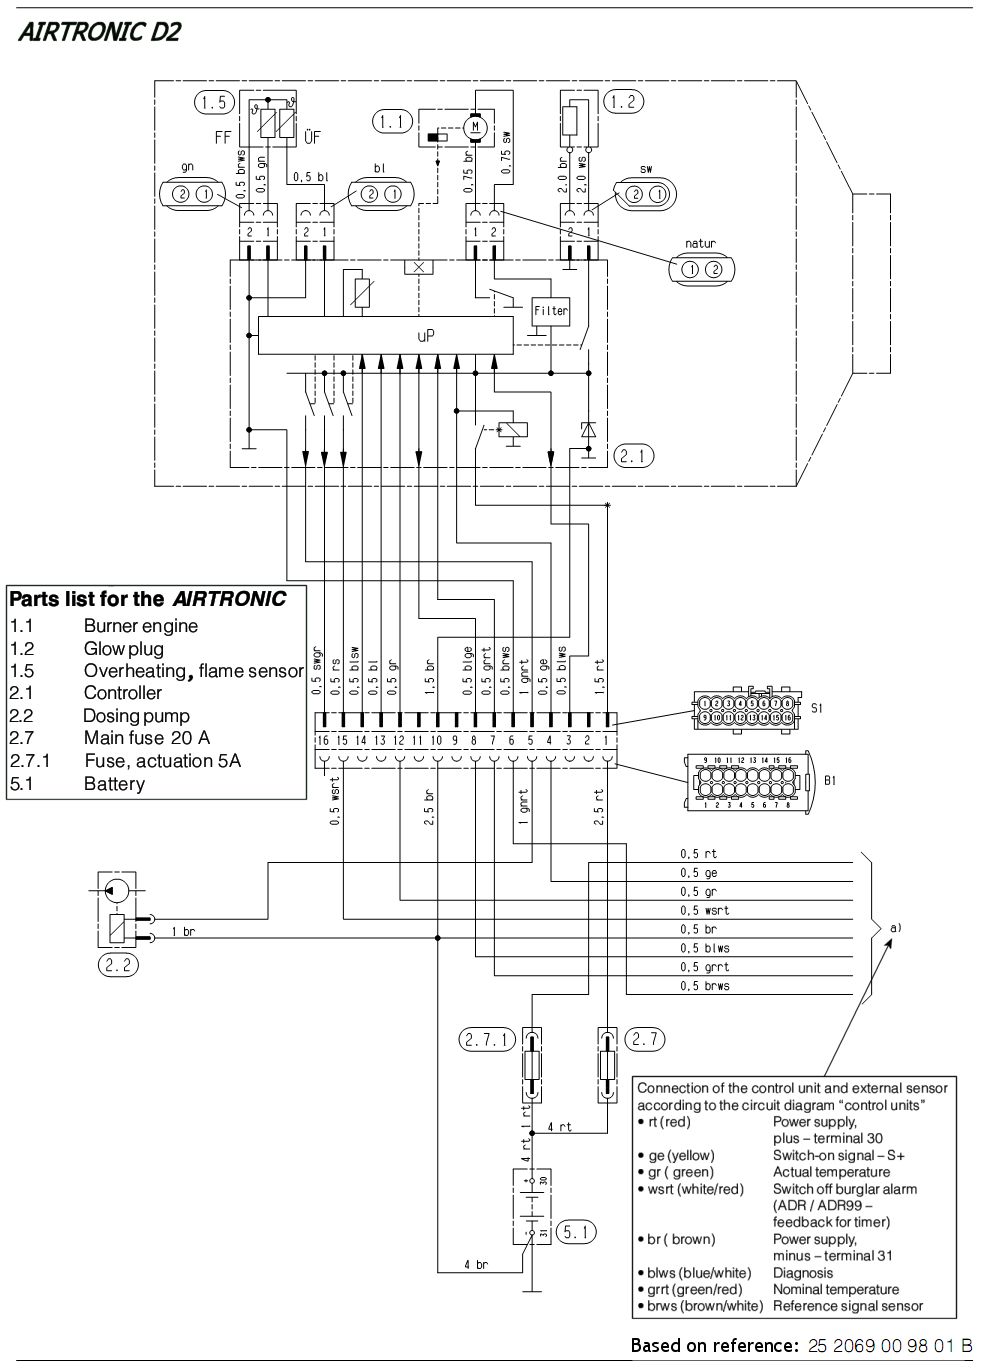 Installing Airtronic D2 Heater in Manins Applause 500  Eberspacher Heater Control Wiring Diagram    Manins.net.au